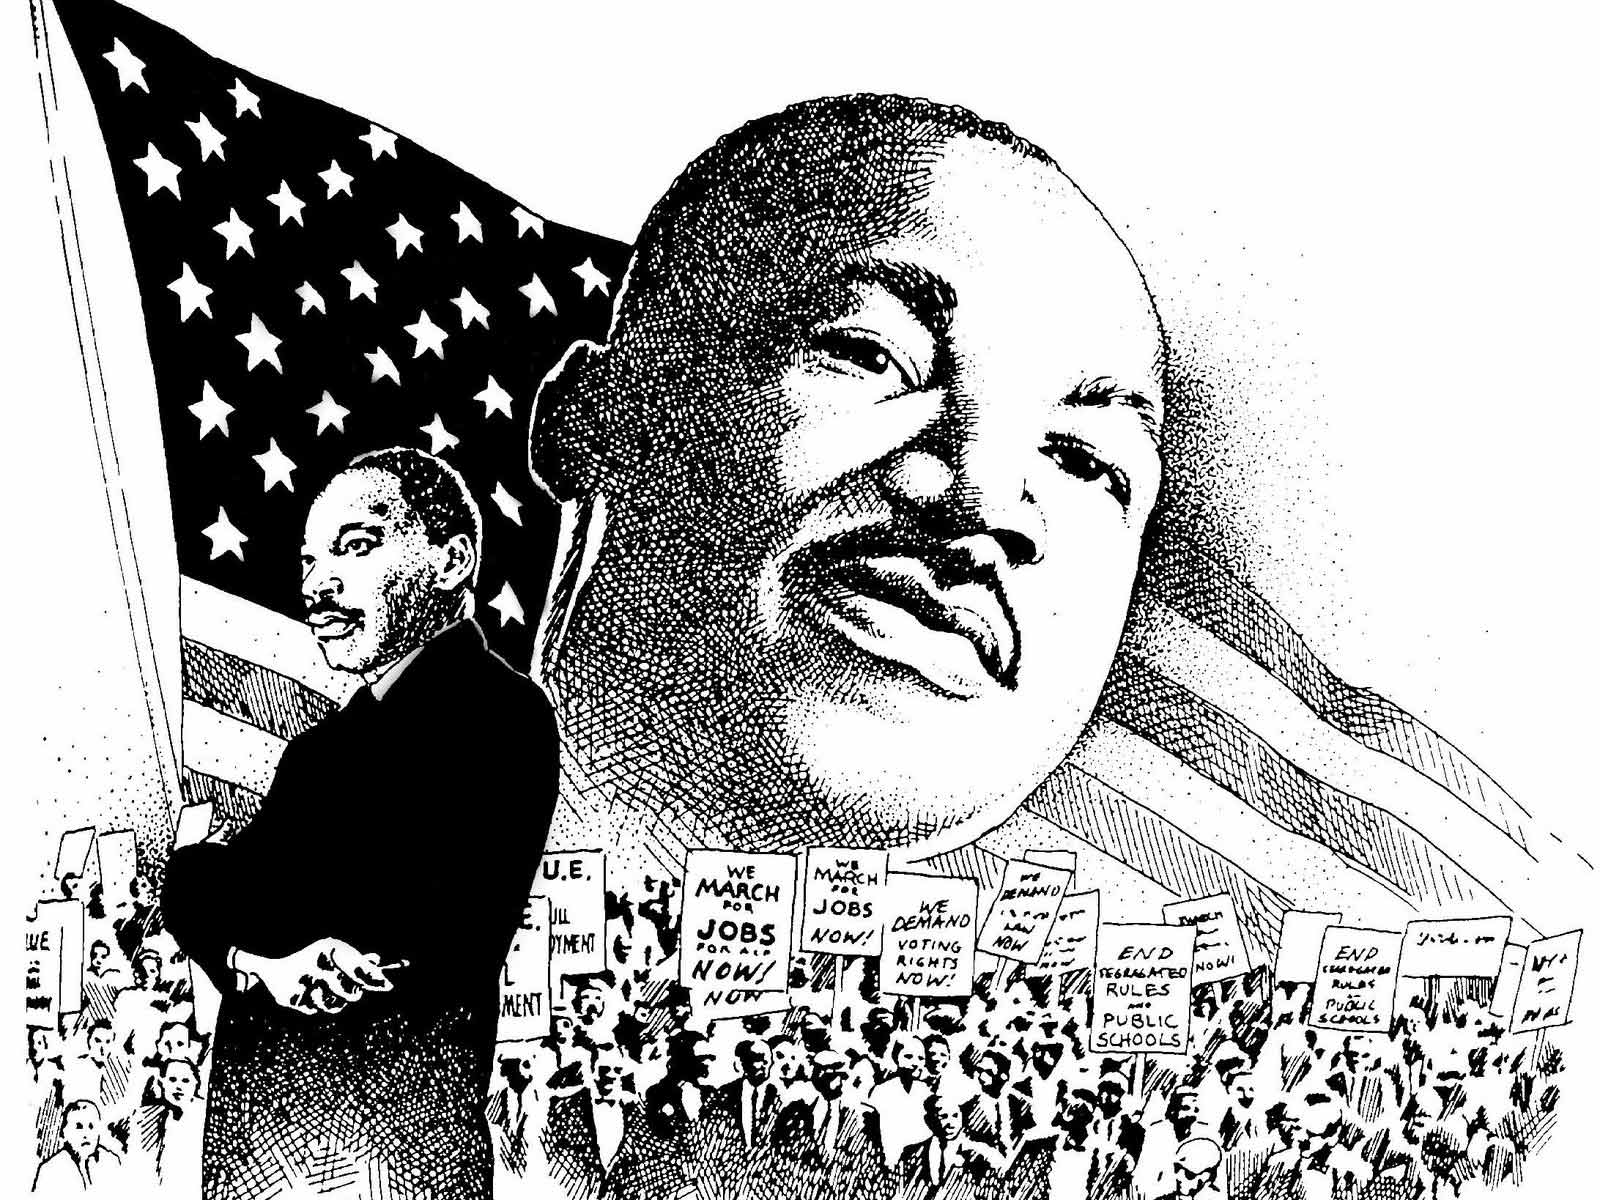 martin luther king jr day clip art